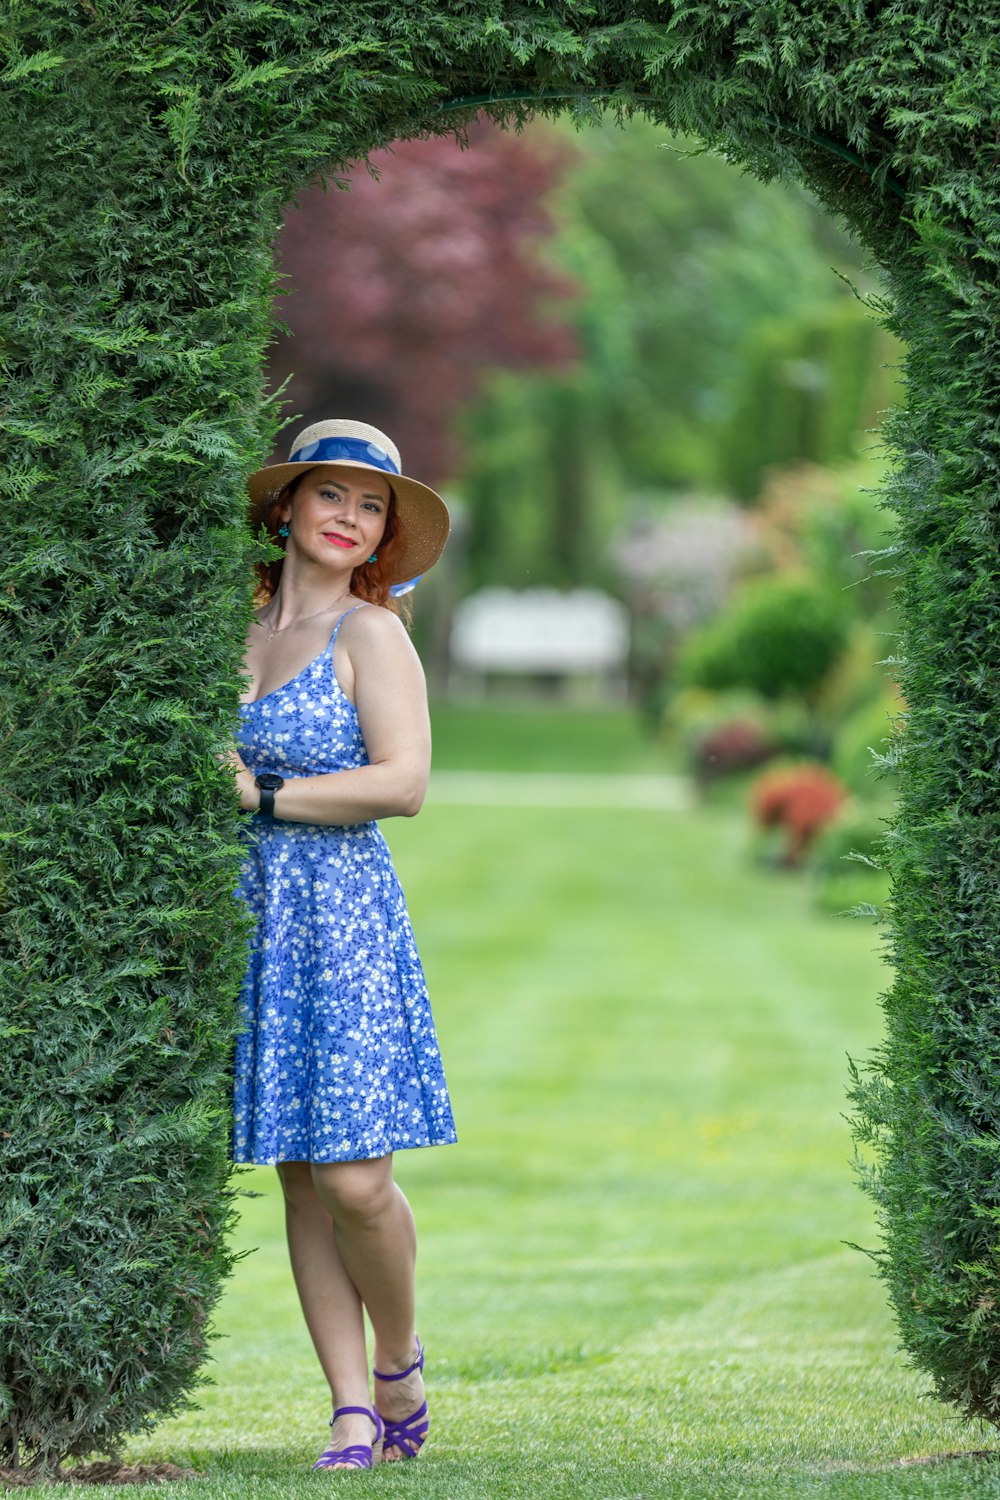 a woman in a blue dress and hat standing in a garden